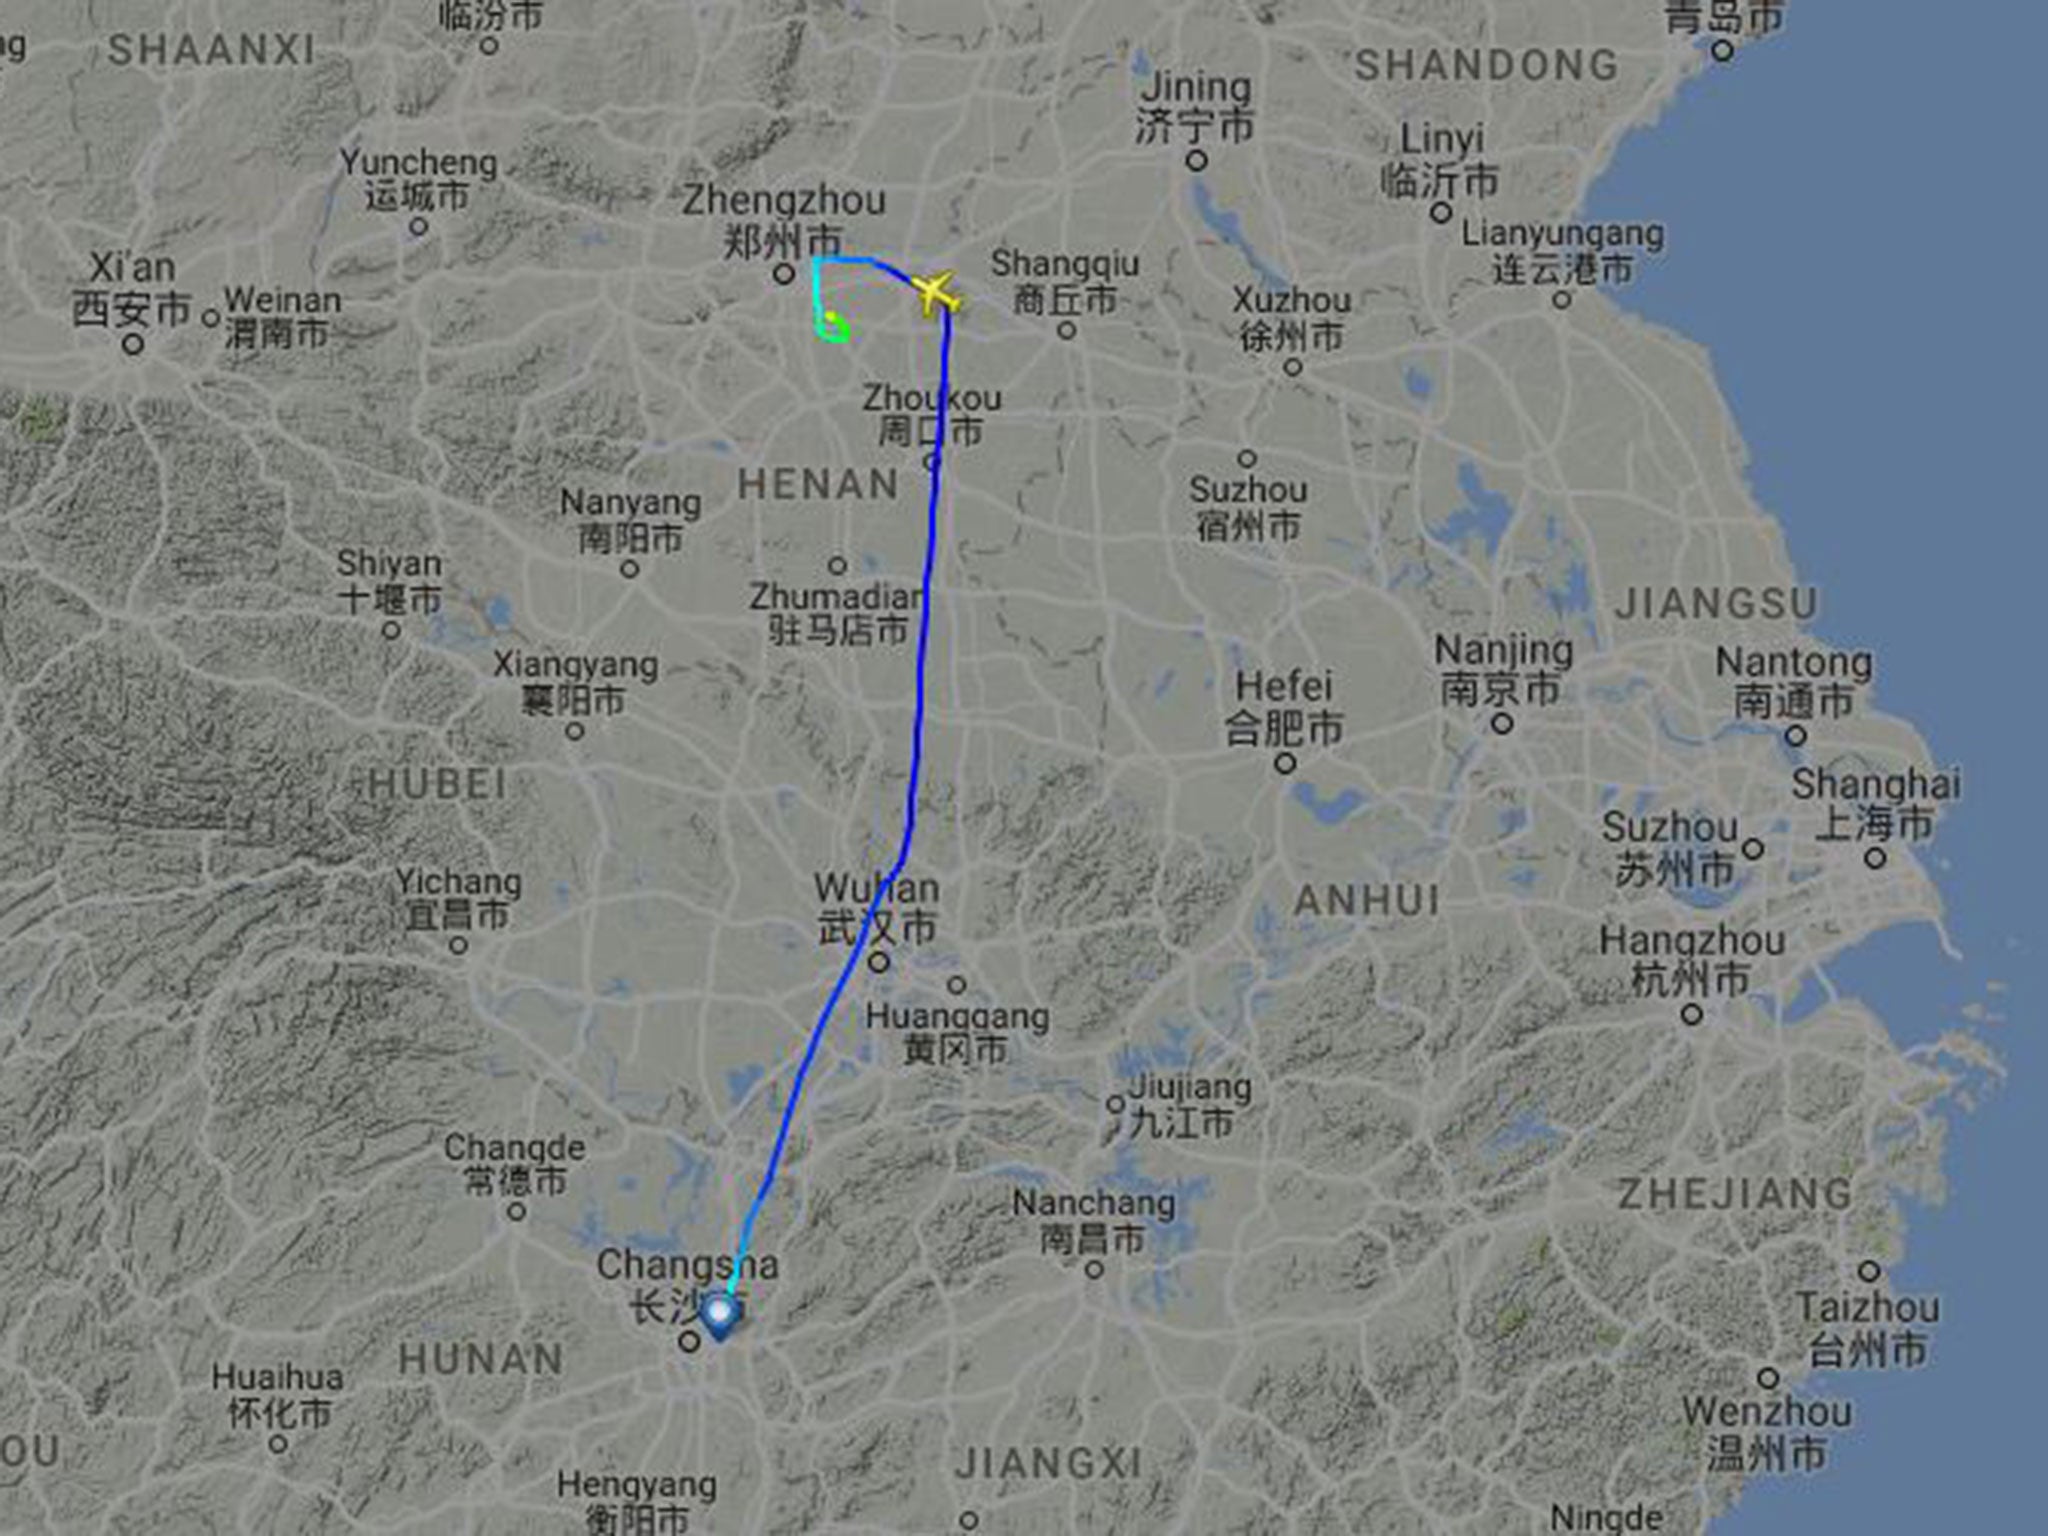 Air China Flight 1350 took off from Changsha and was scheduled to arrive at Beijing Capital International Airport, but made an unscheduled landing at Zhengzhou Xinzheng International Airport